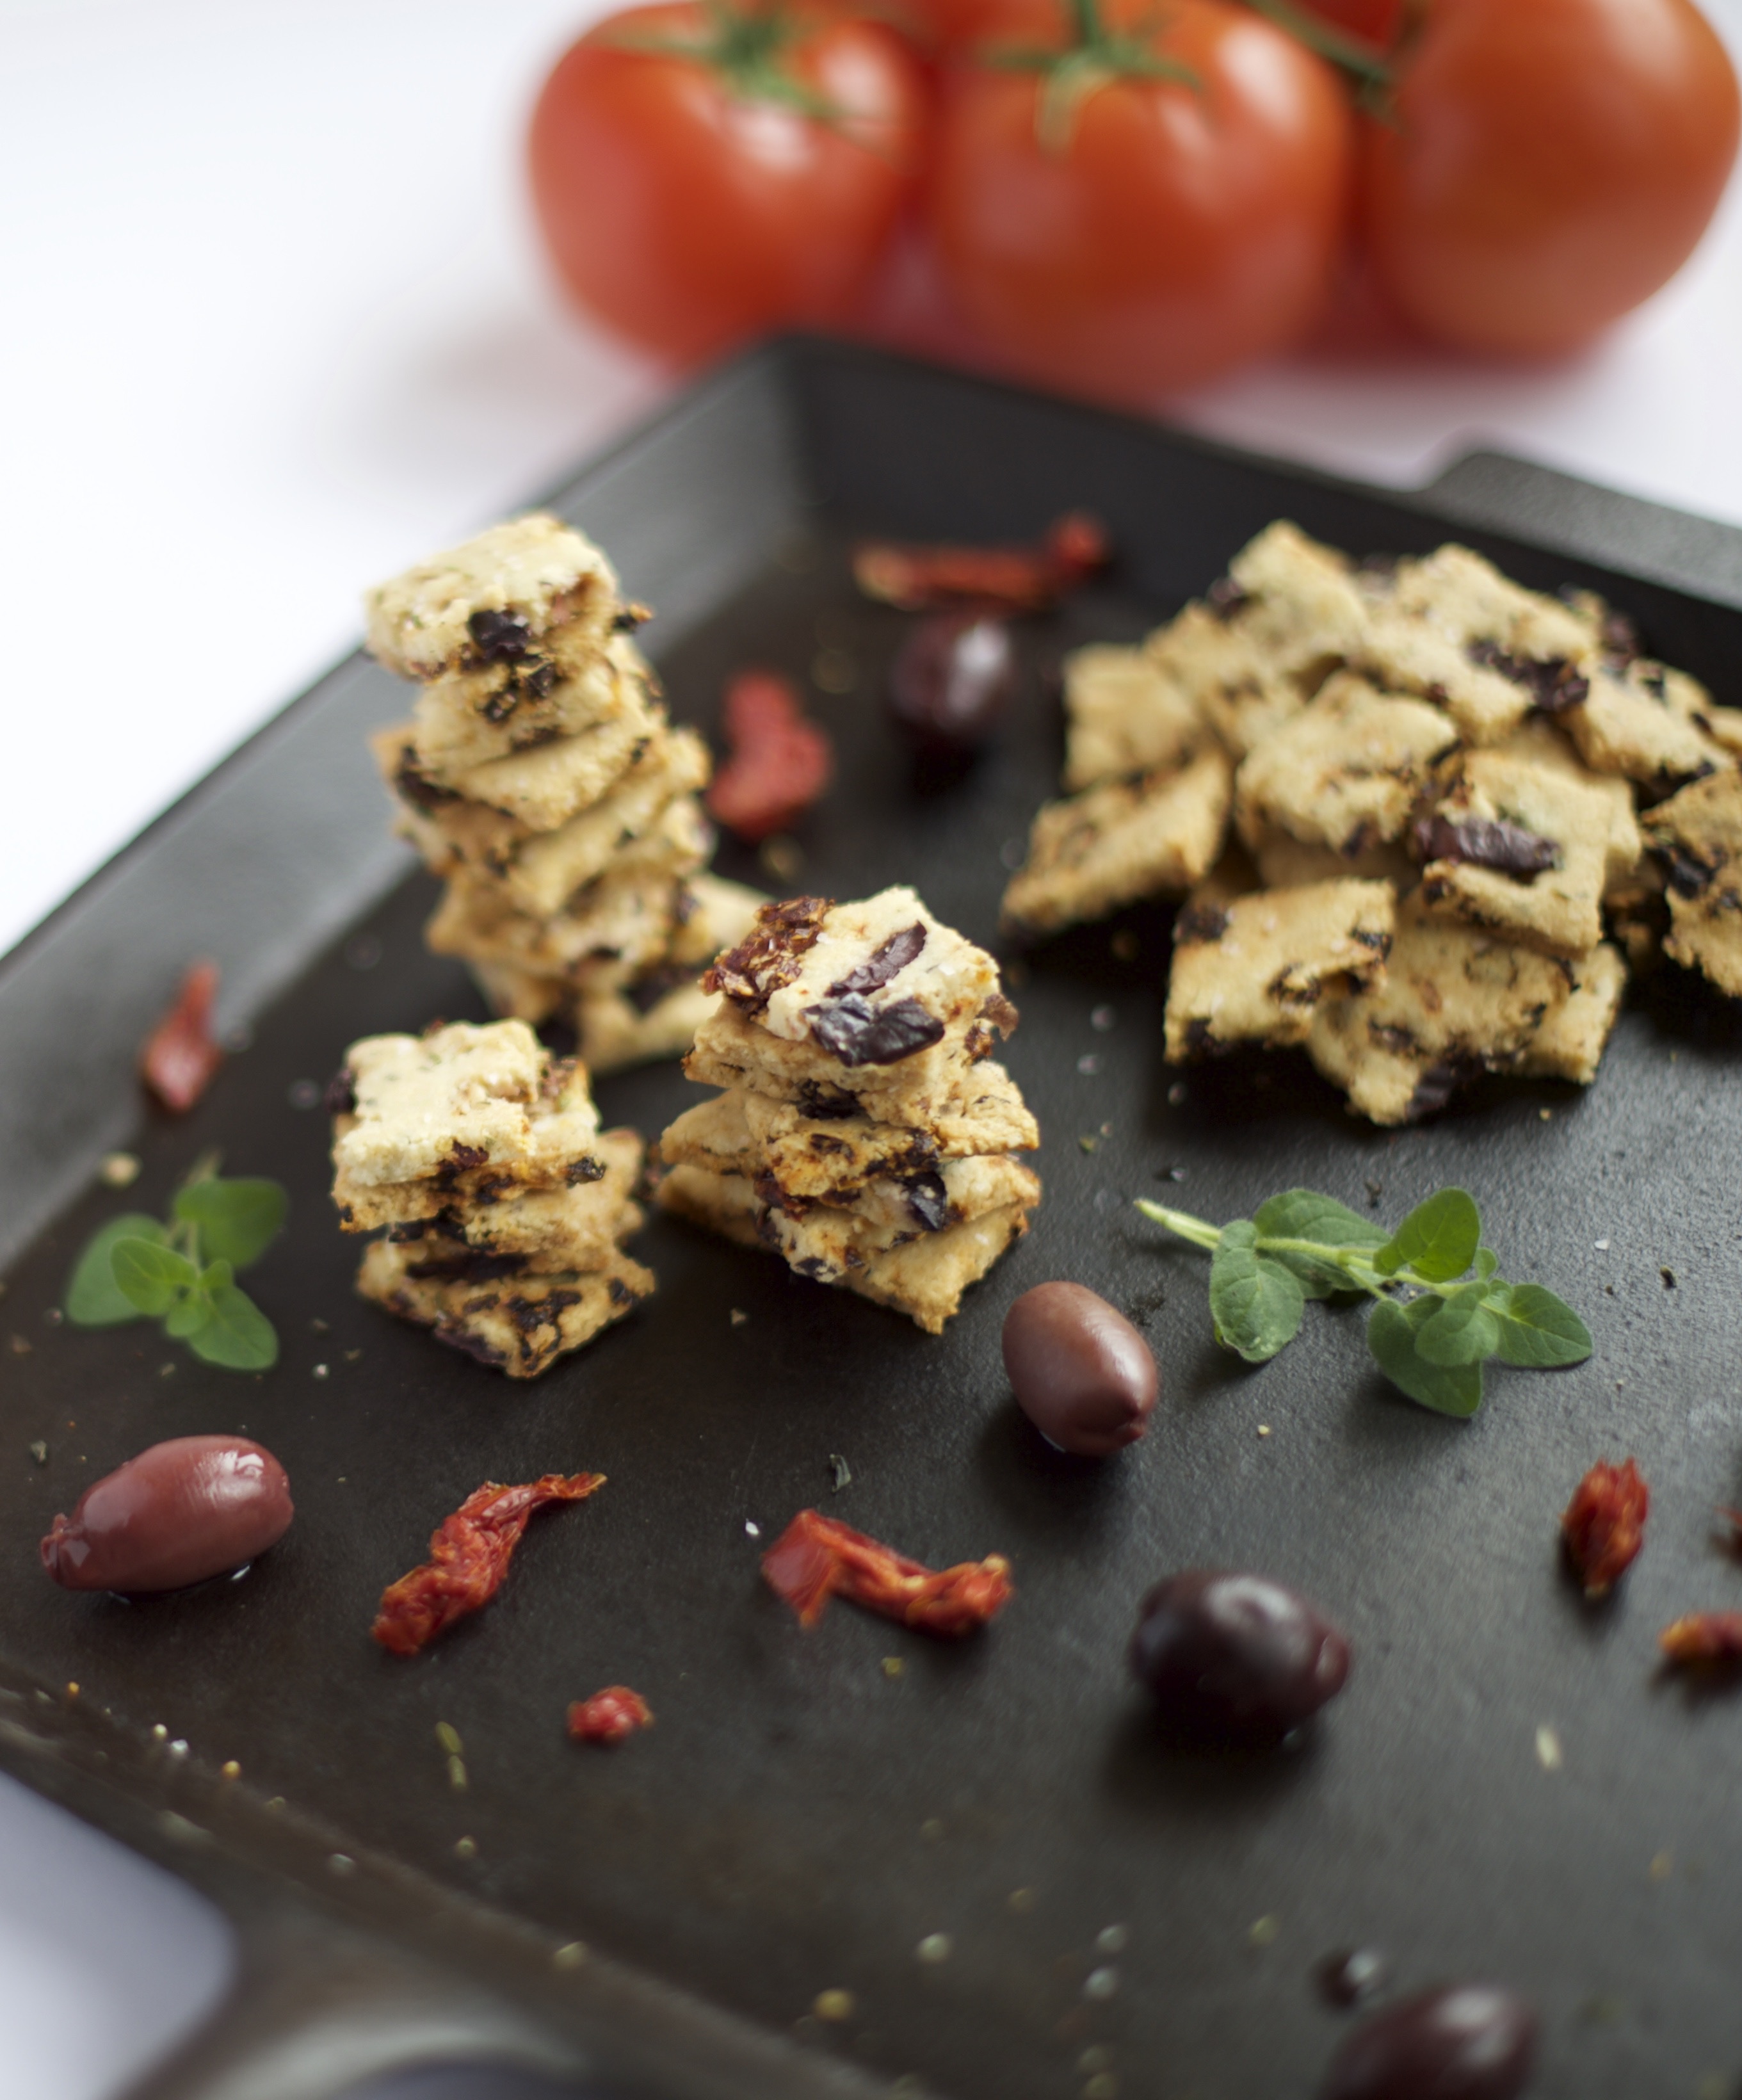 Photo of Grain Free Sun-Dried Tomato and Olive Crackers on a plate.